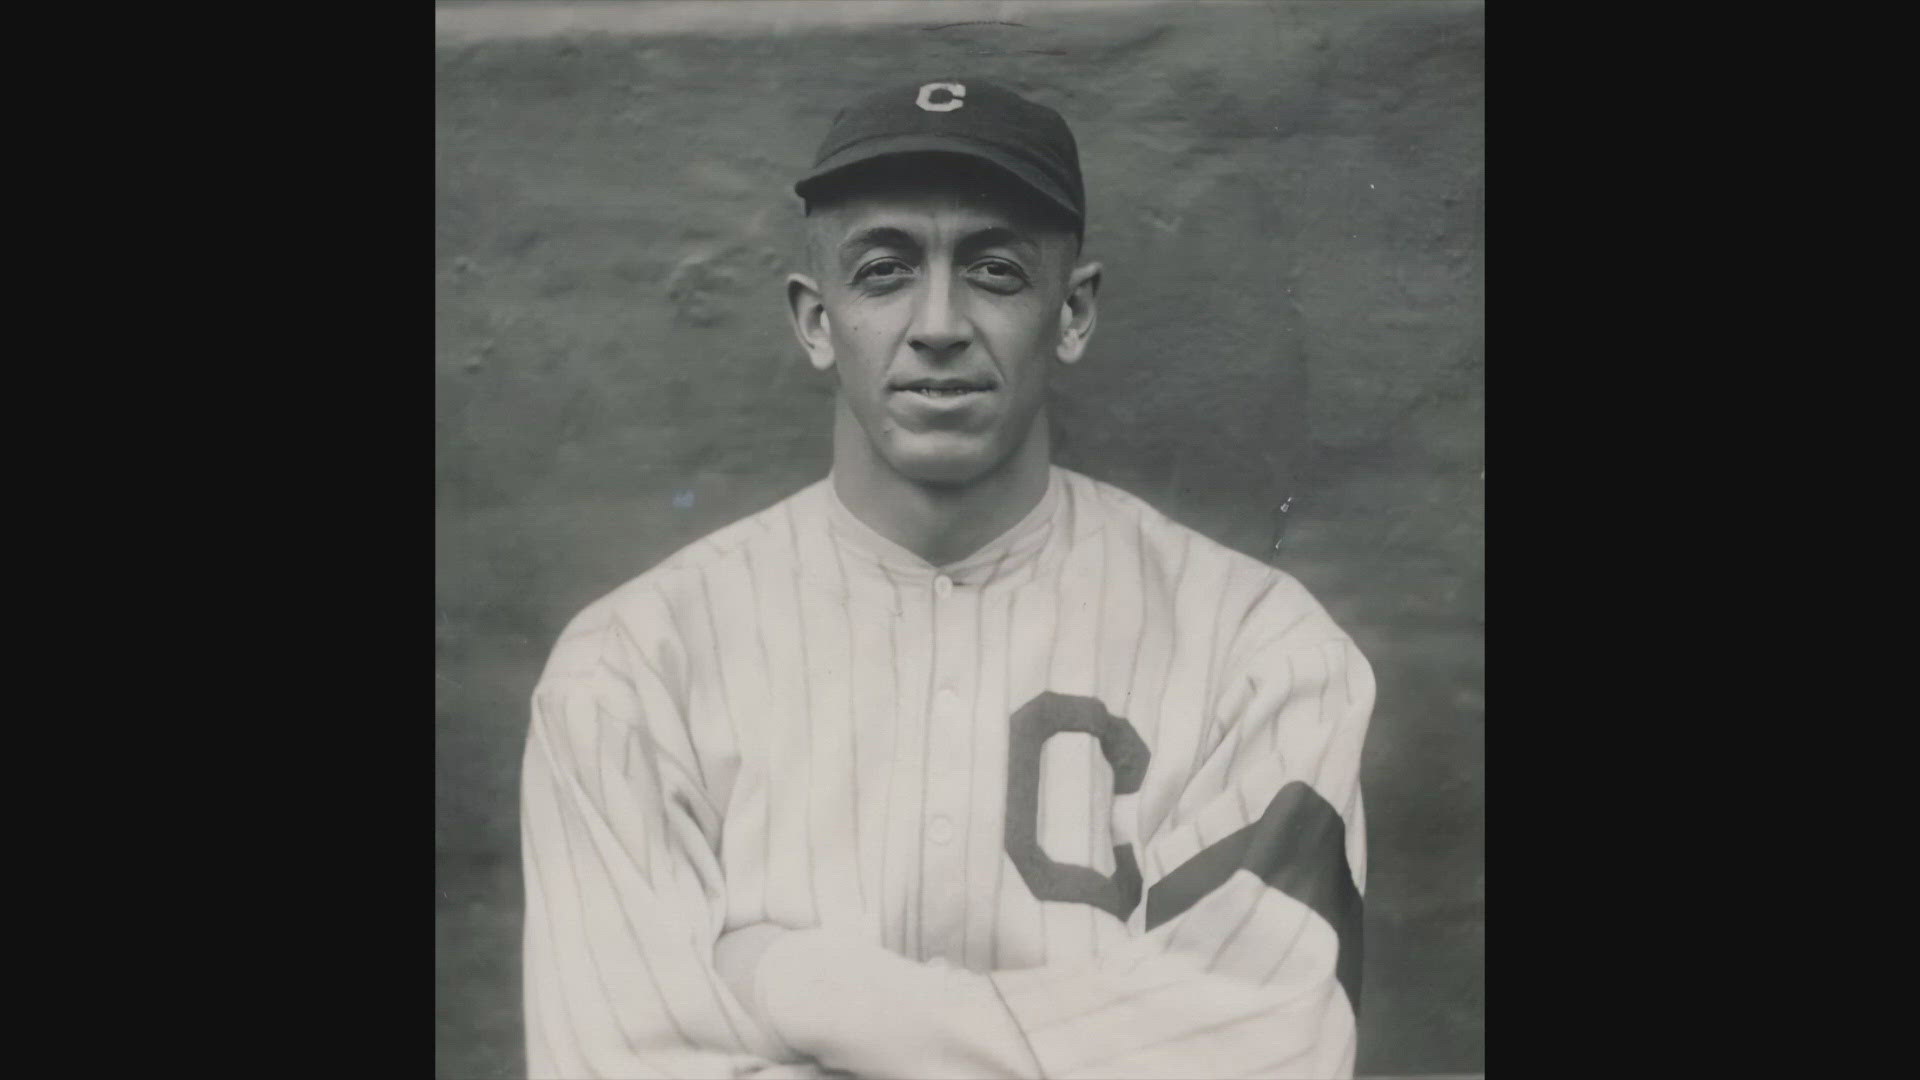 Caldwell, a right-handed pitcher, was making his Cleveland debut when a storm rolled in off of Lake Erie just in time for the game's 9th inning.